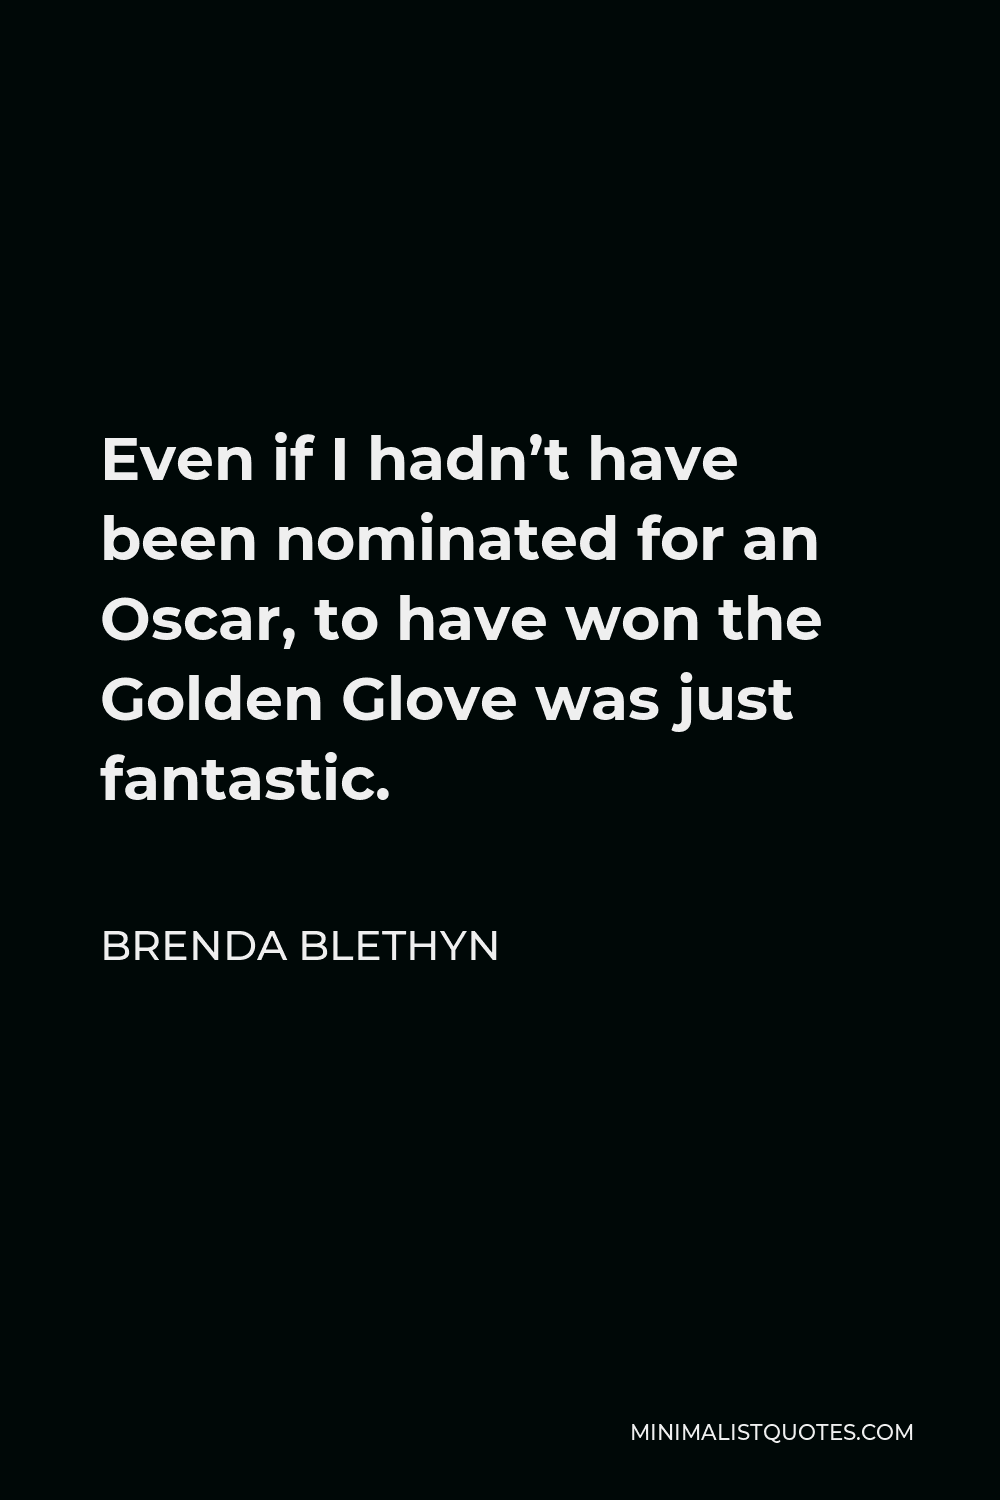 Brenda Blethyn Quote - Even if I hadn’t have been nominated for an Oscar, to have won the Golden Glove was just fantastic.